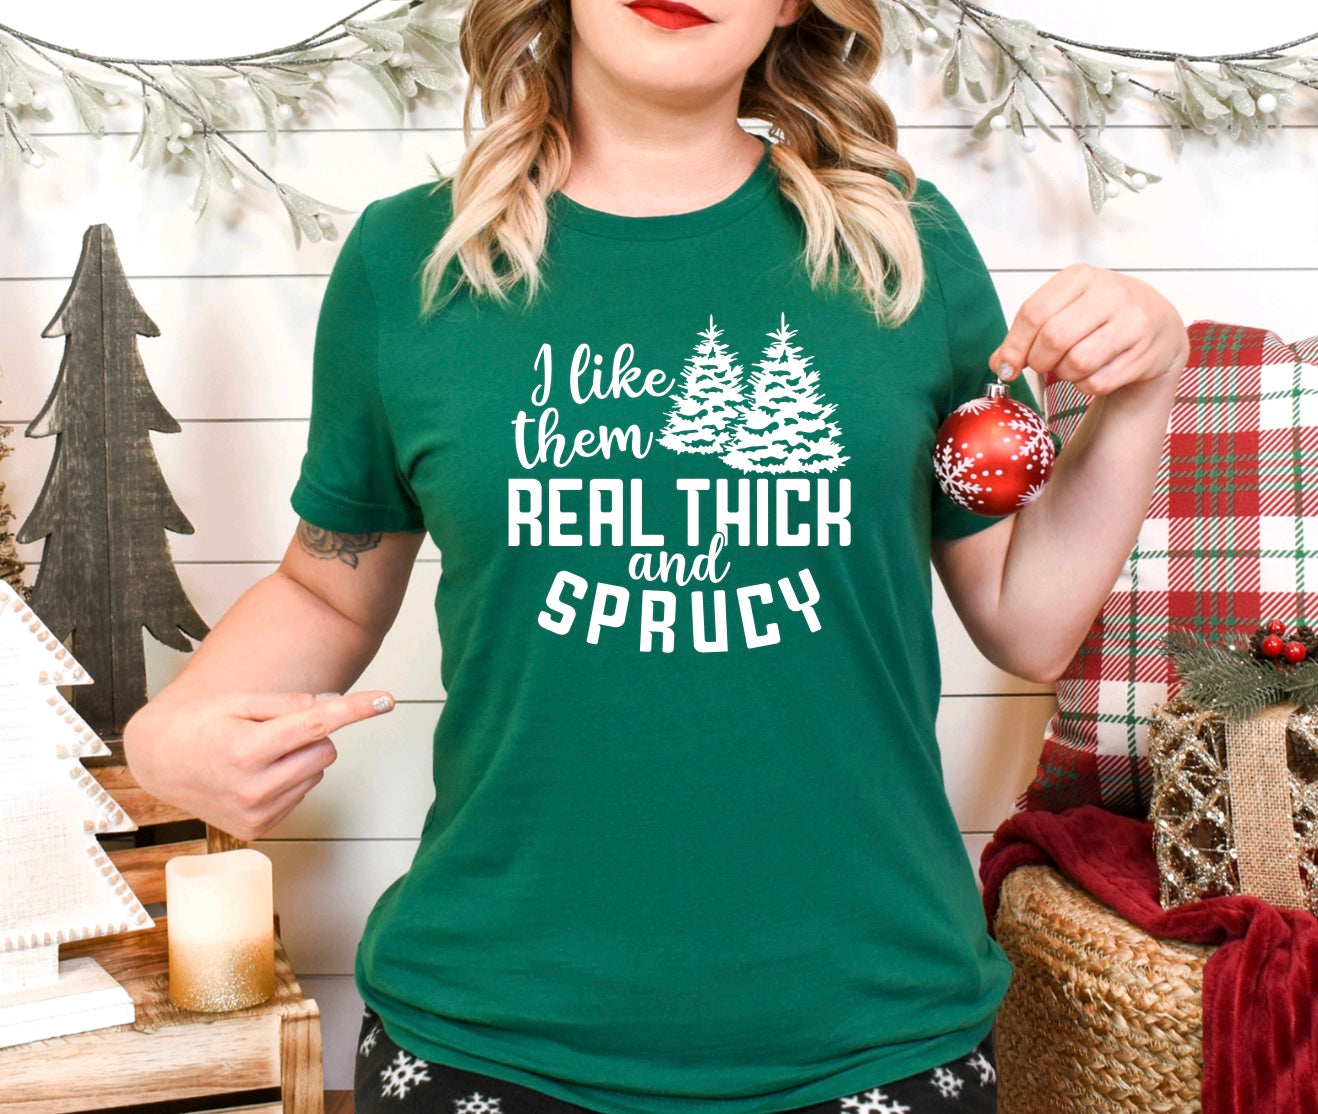 I like them real thick and sprucy unisex Christmas t-shirt for women in green